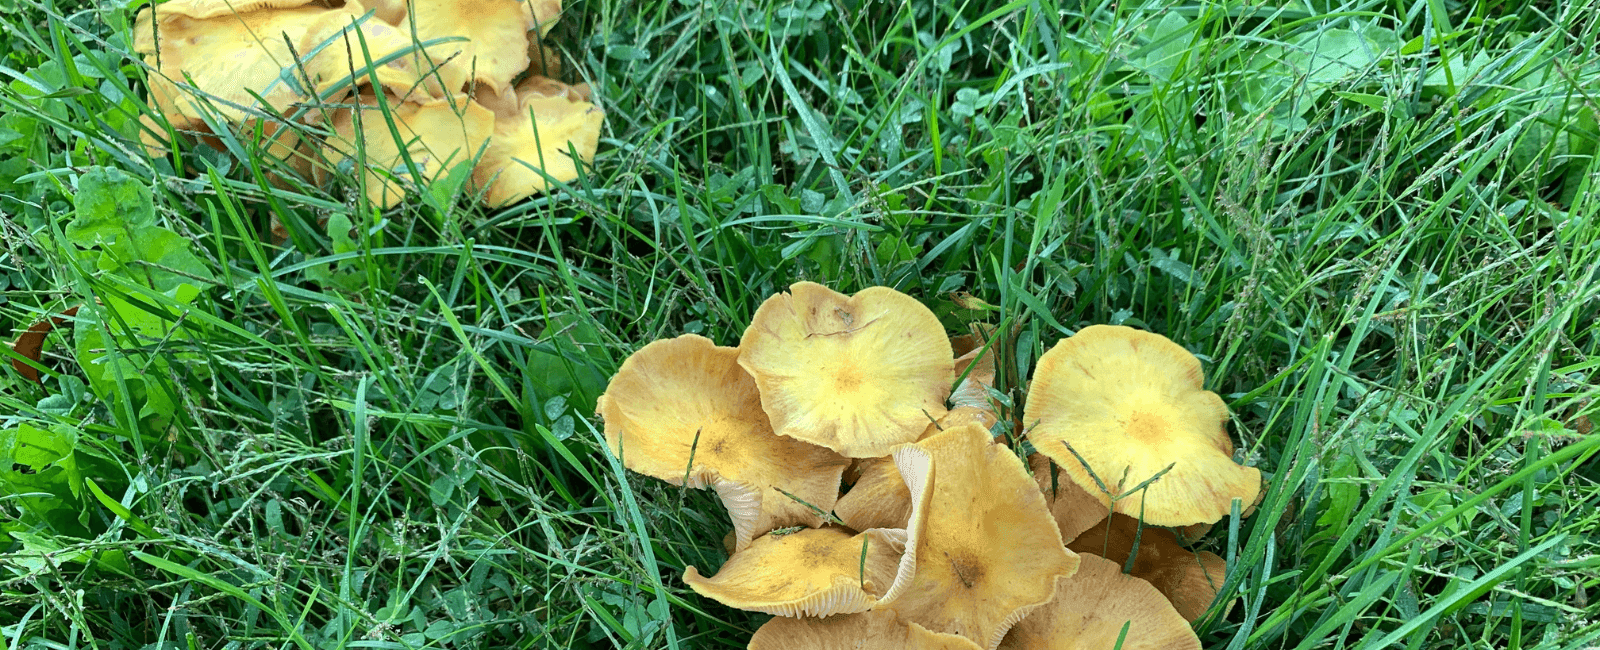 Friend or Foe? Identifying Common Mushrooms That Grow in Your Yard